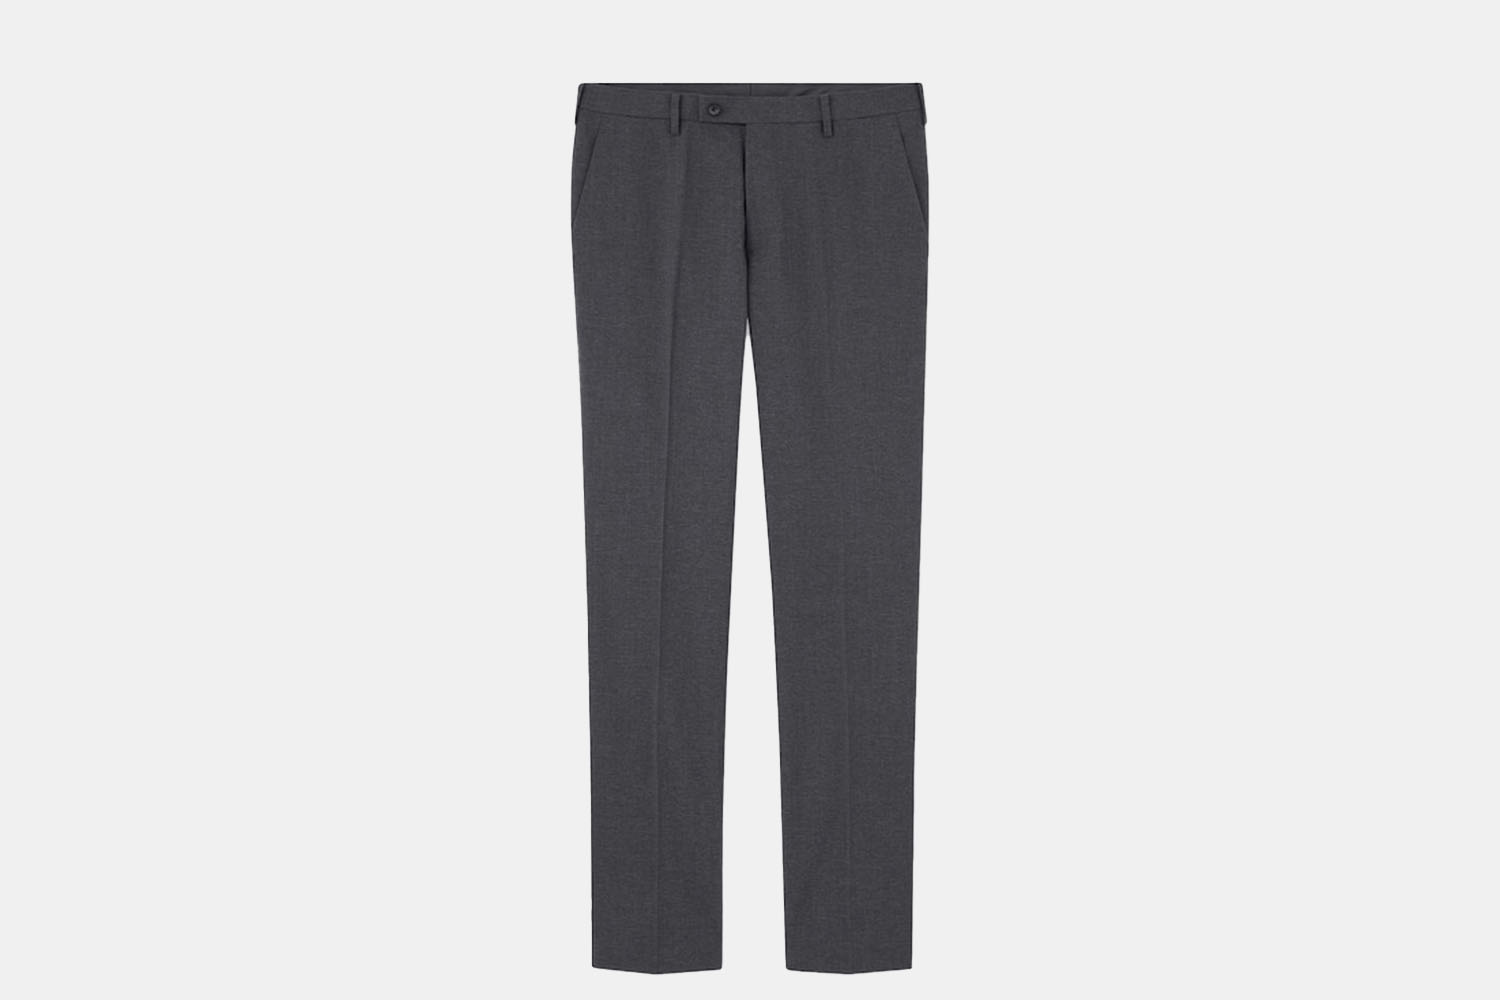 Uniqlo's Comfortable Dress Pants Are 25% Off For the Back to Work